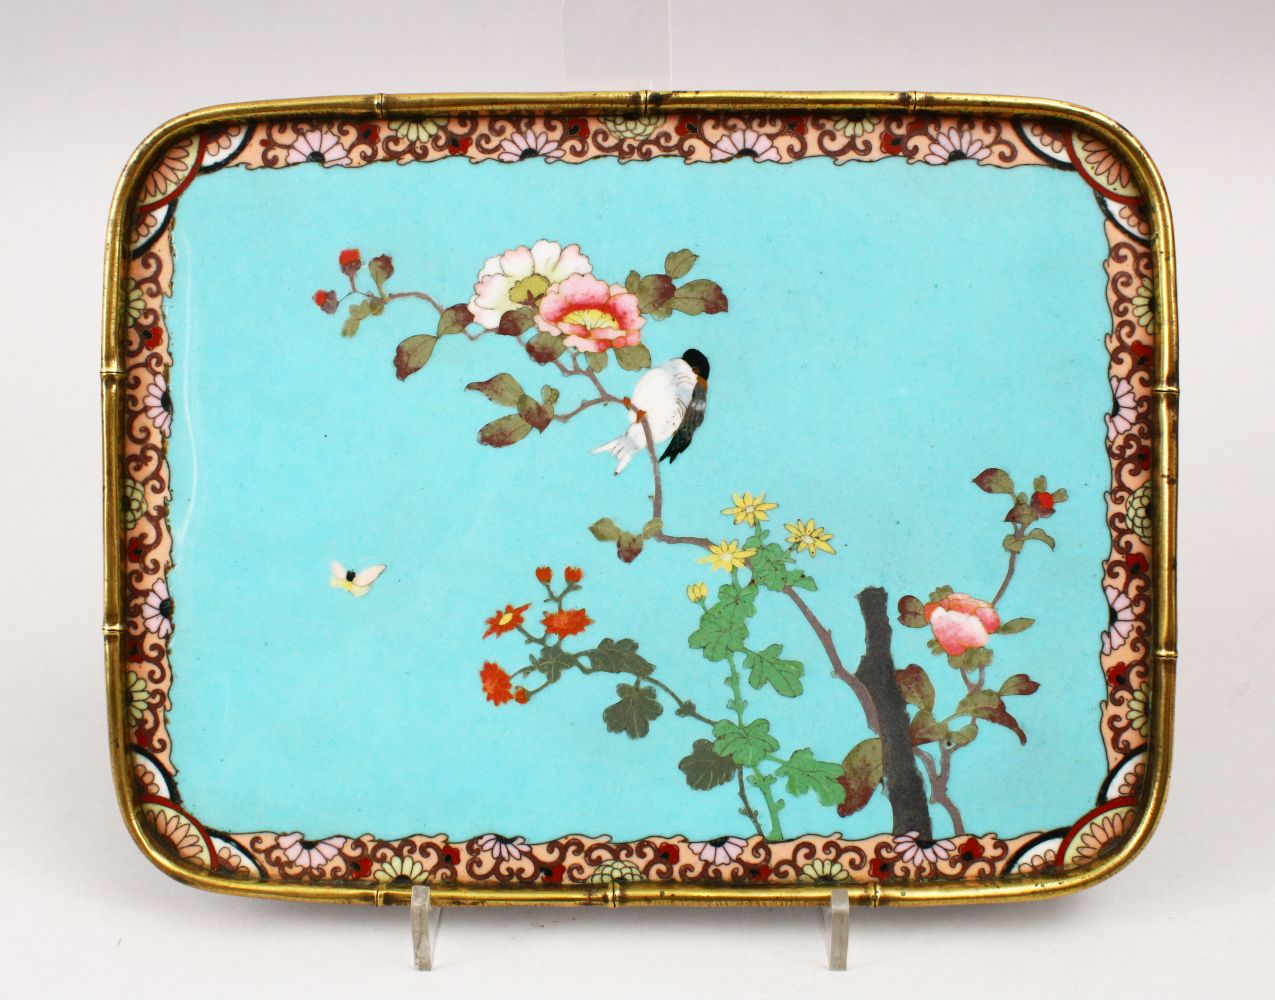 A GOOD JAPANESE MEIJI PERIOD CLOISONNE TRAY ATTRIBUTED TO NAMIKAWA SOSUKE, the tray with a bronze